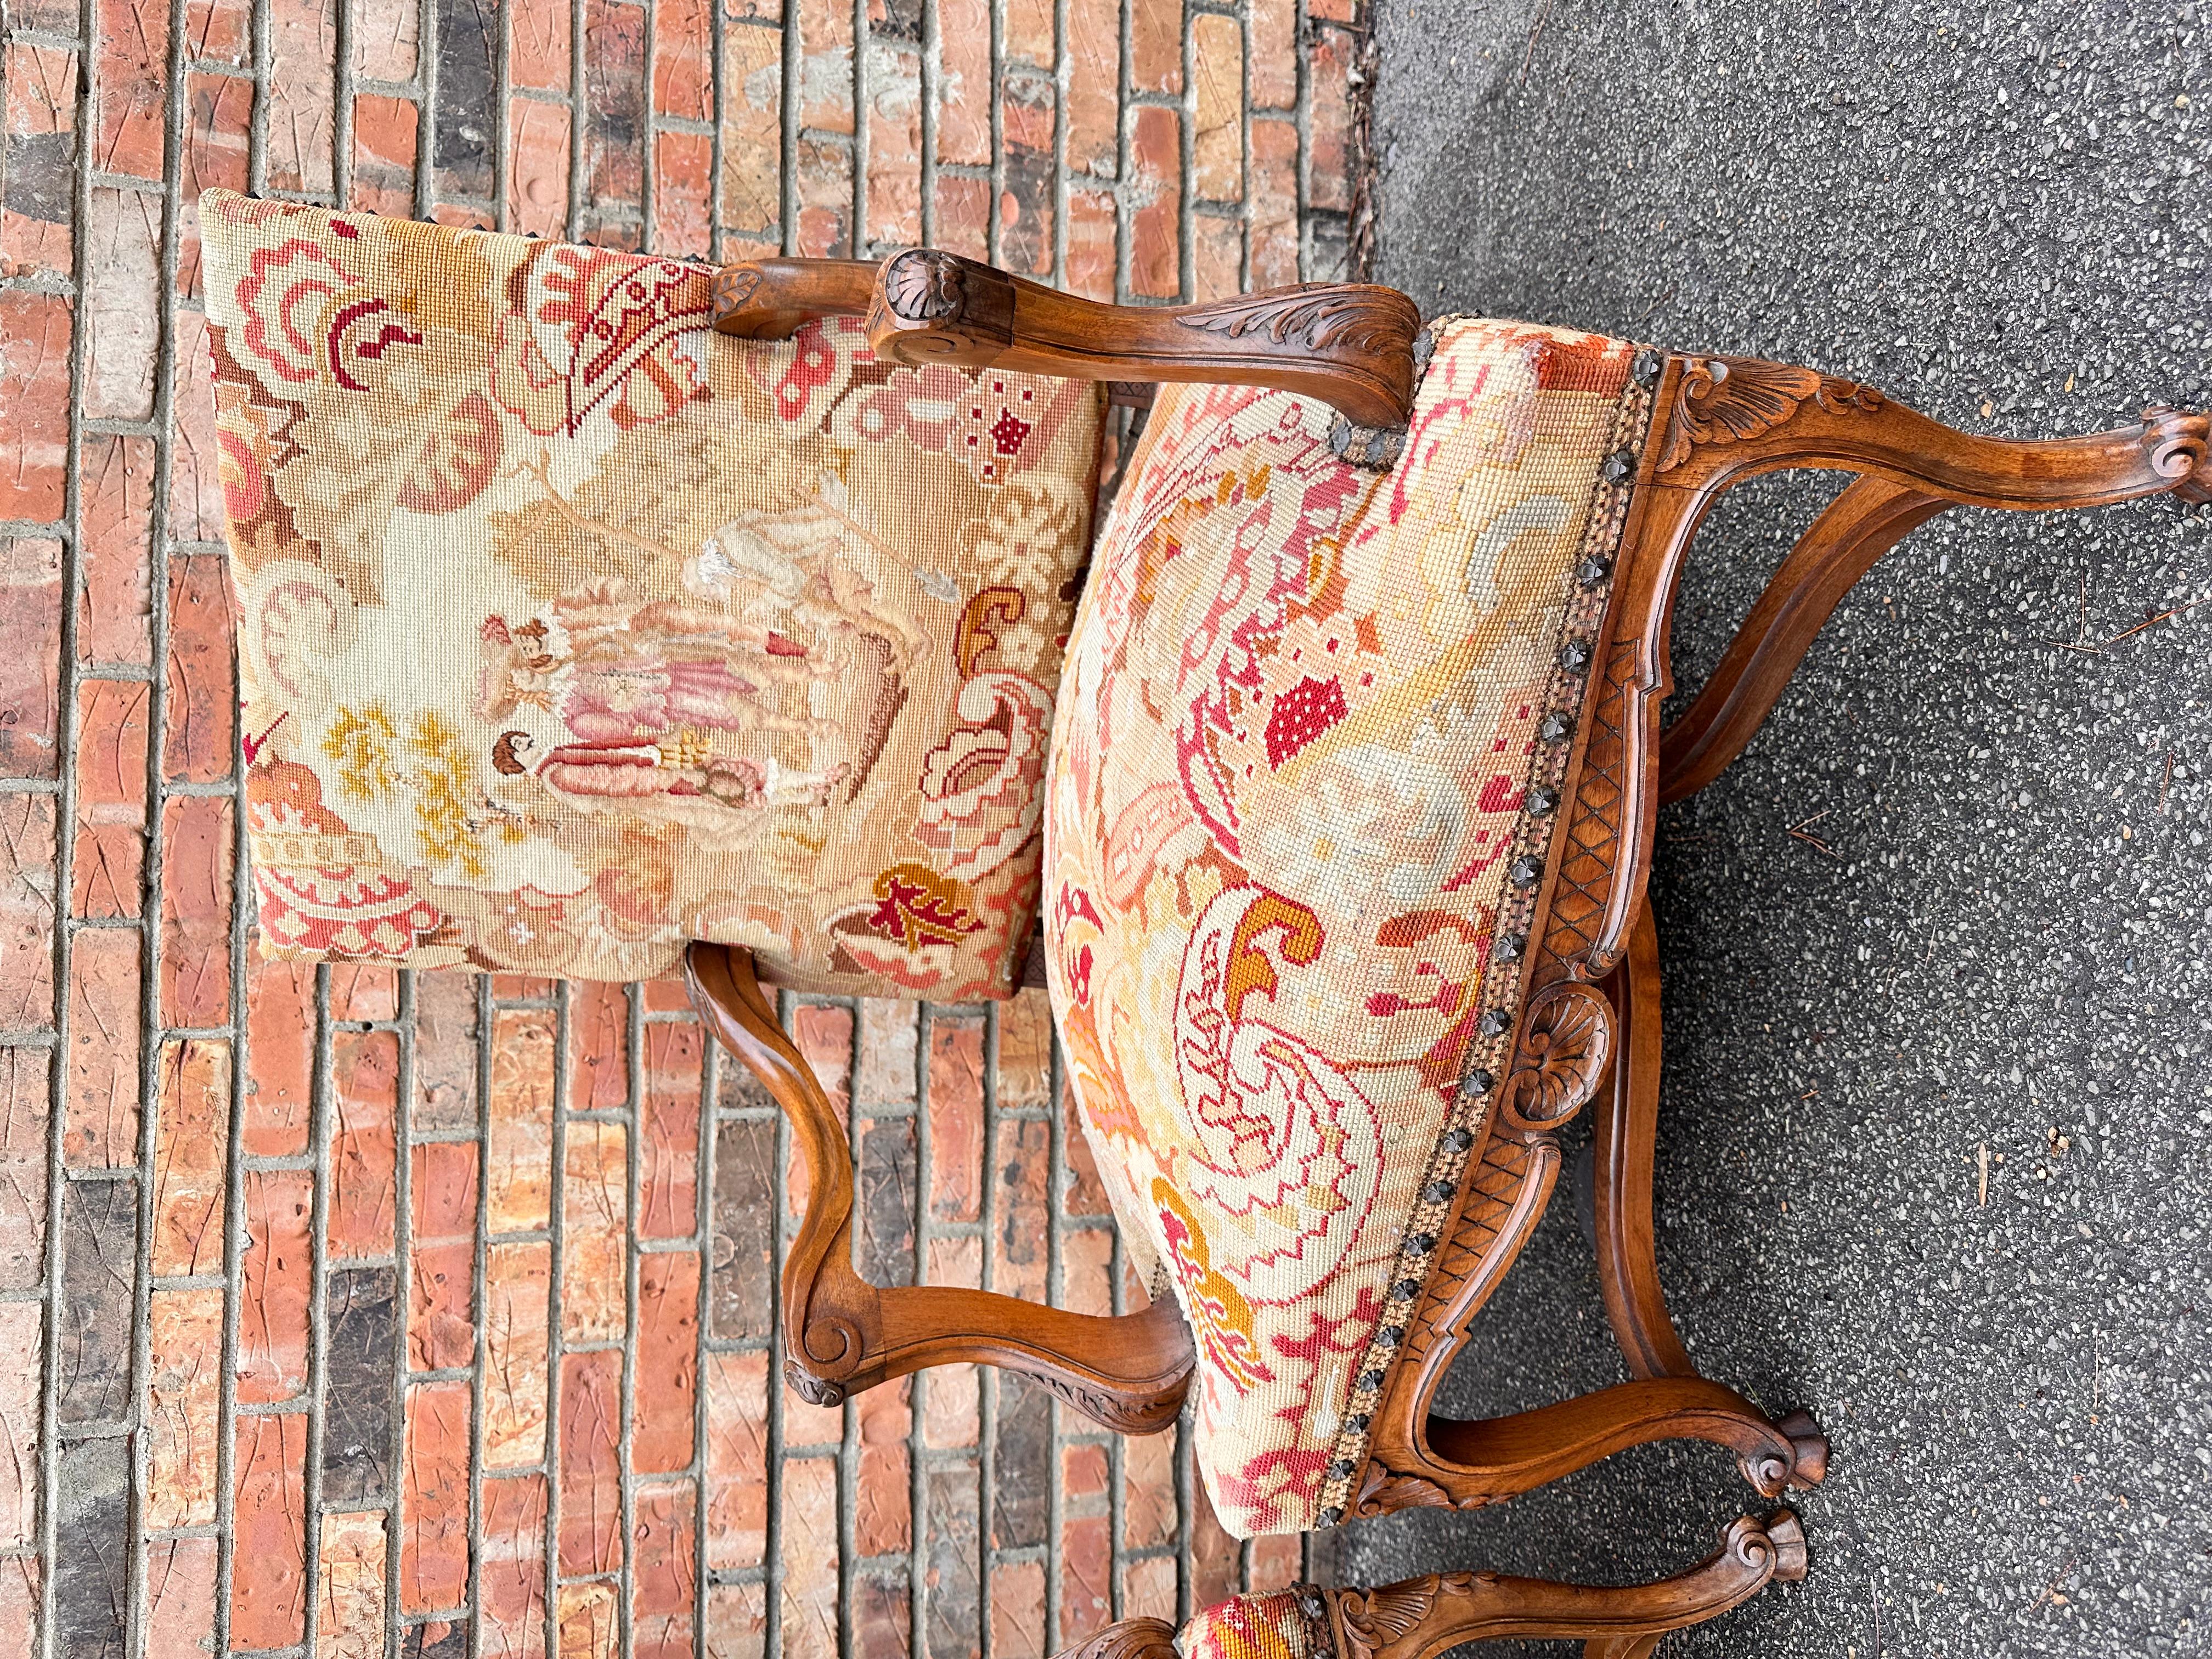 This is a beautiful pair of antique needle point chairs! They have been adorned in in hues in peach, beige and rust tones and pair wonderfully with the warm wood. The arms and legs have stunning hand carved designs that are immediately eye-catching.